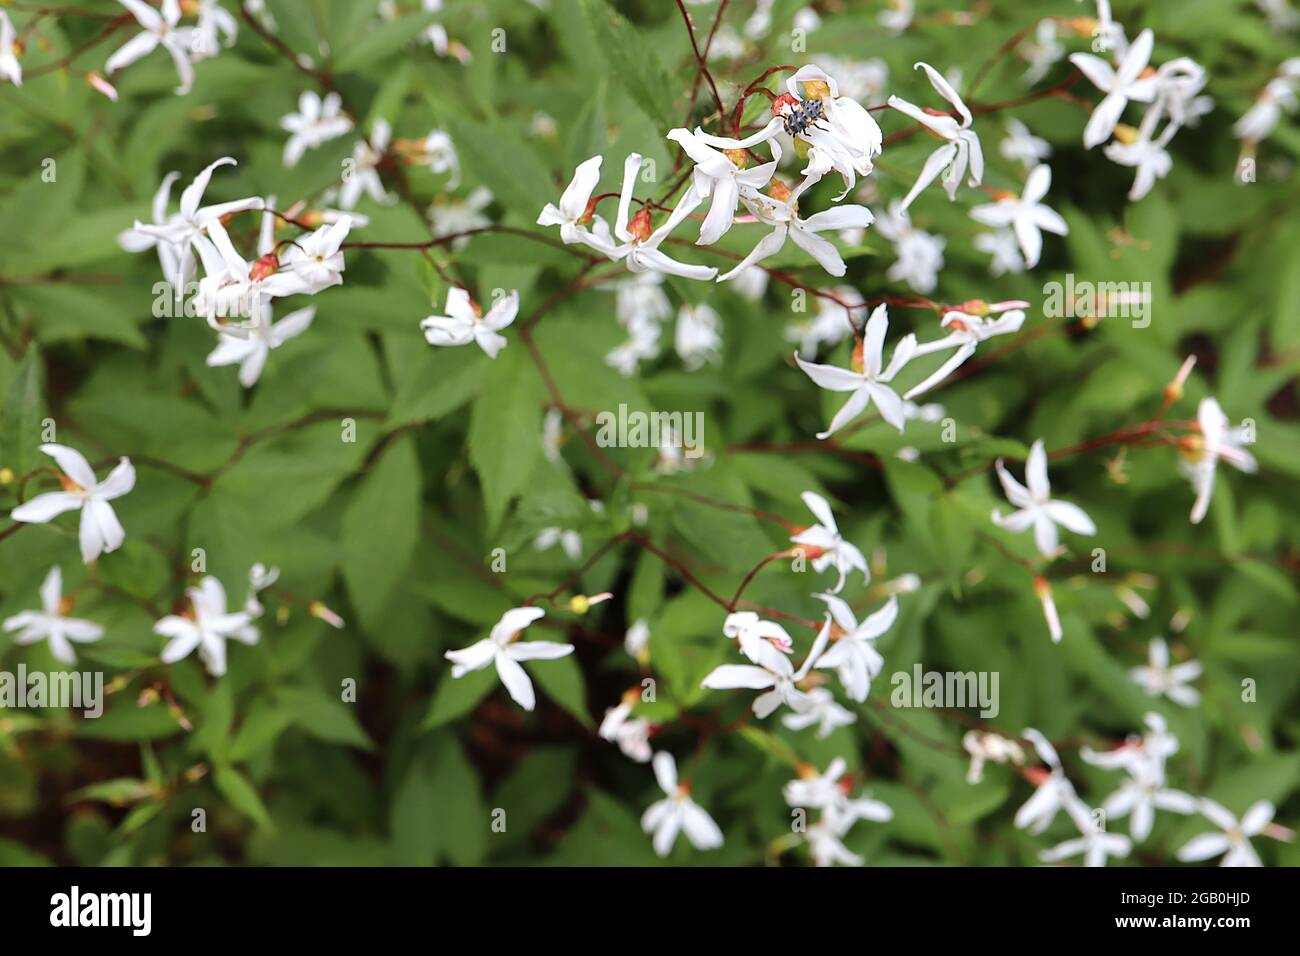 Gillenia trifoliata Bowman’s root – star-shaped white flowers with slender petals and palmately lobed mid green leaves,  June, England, UK Stock Photo